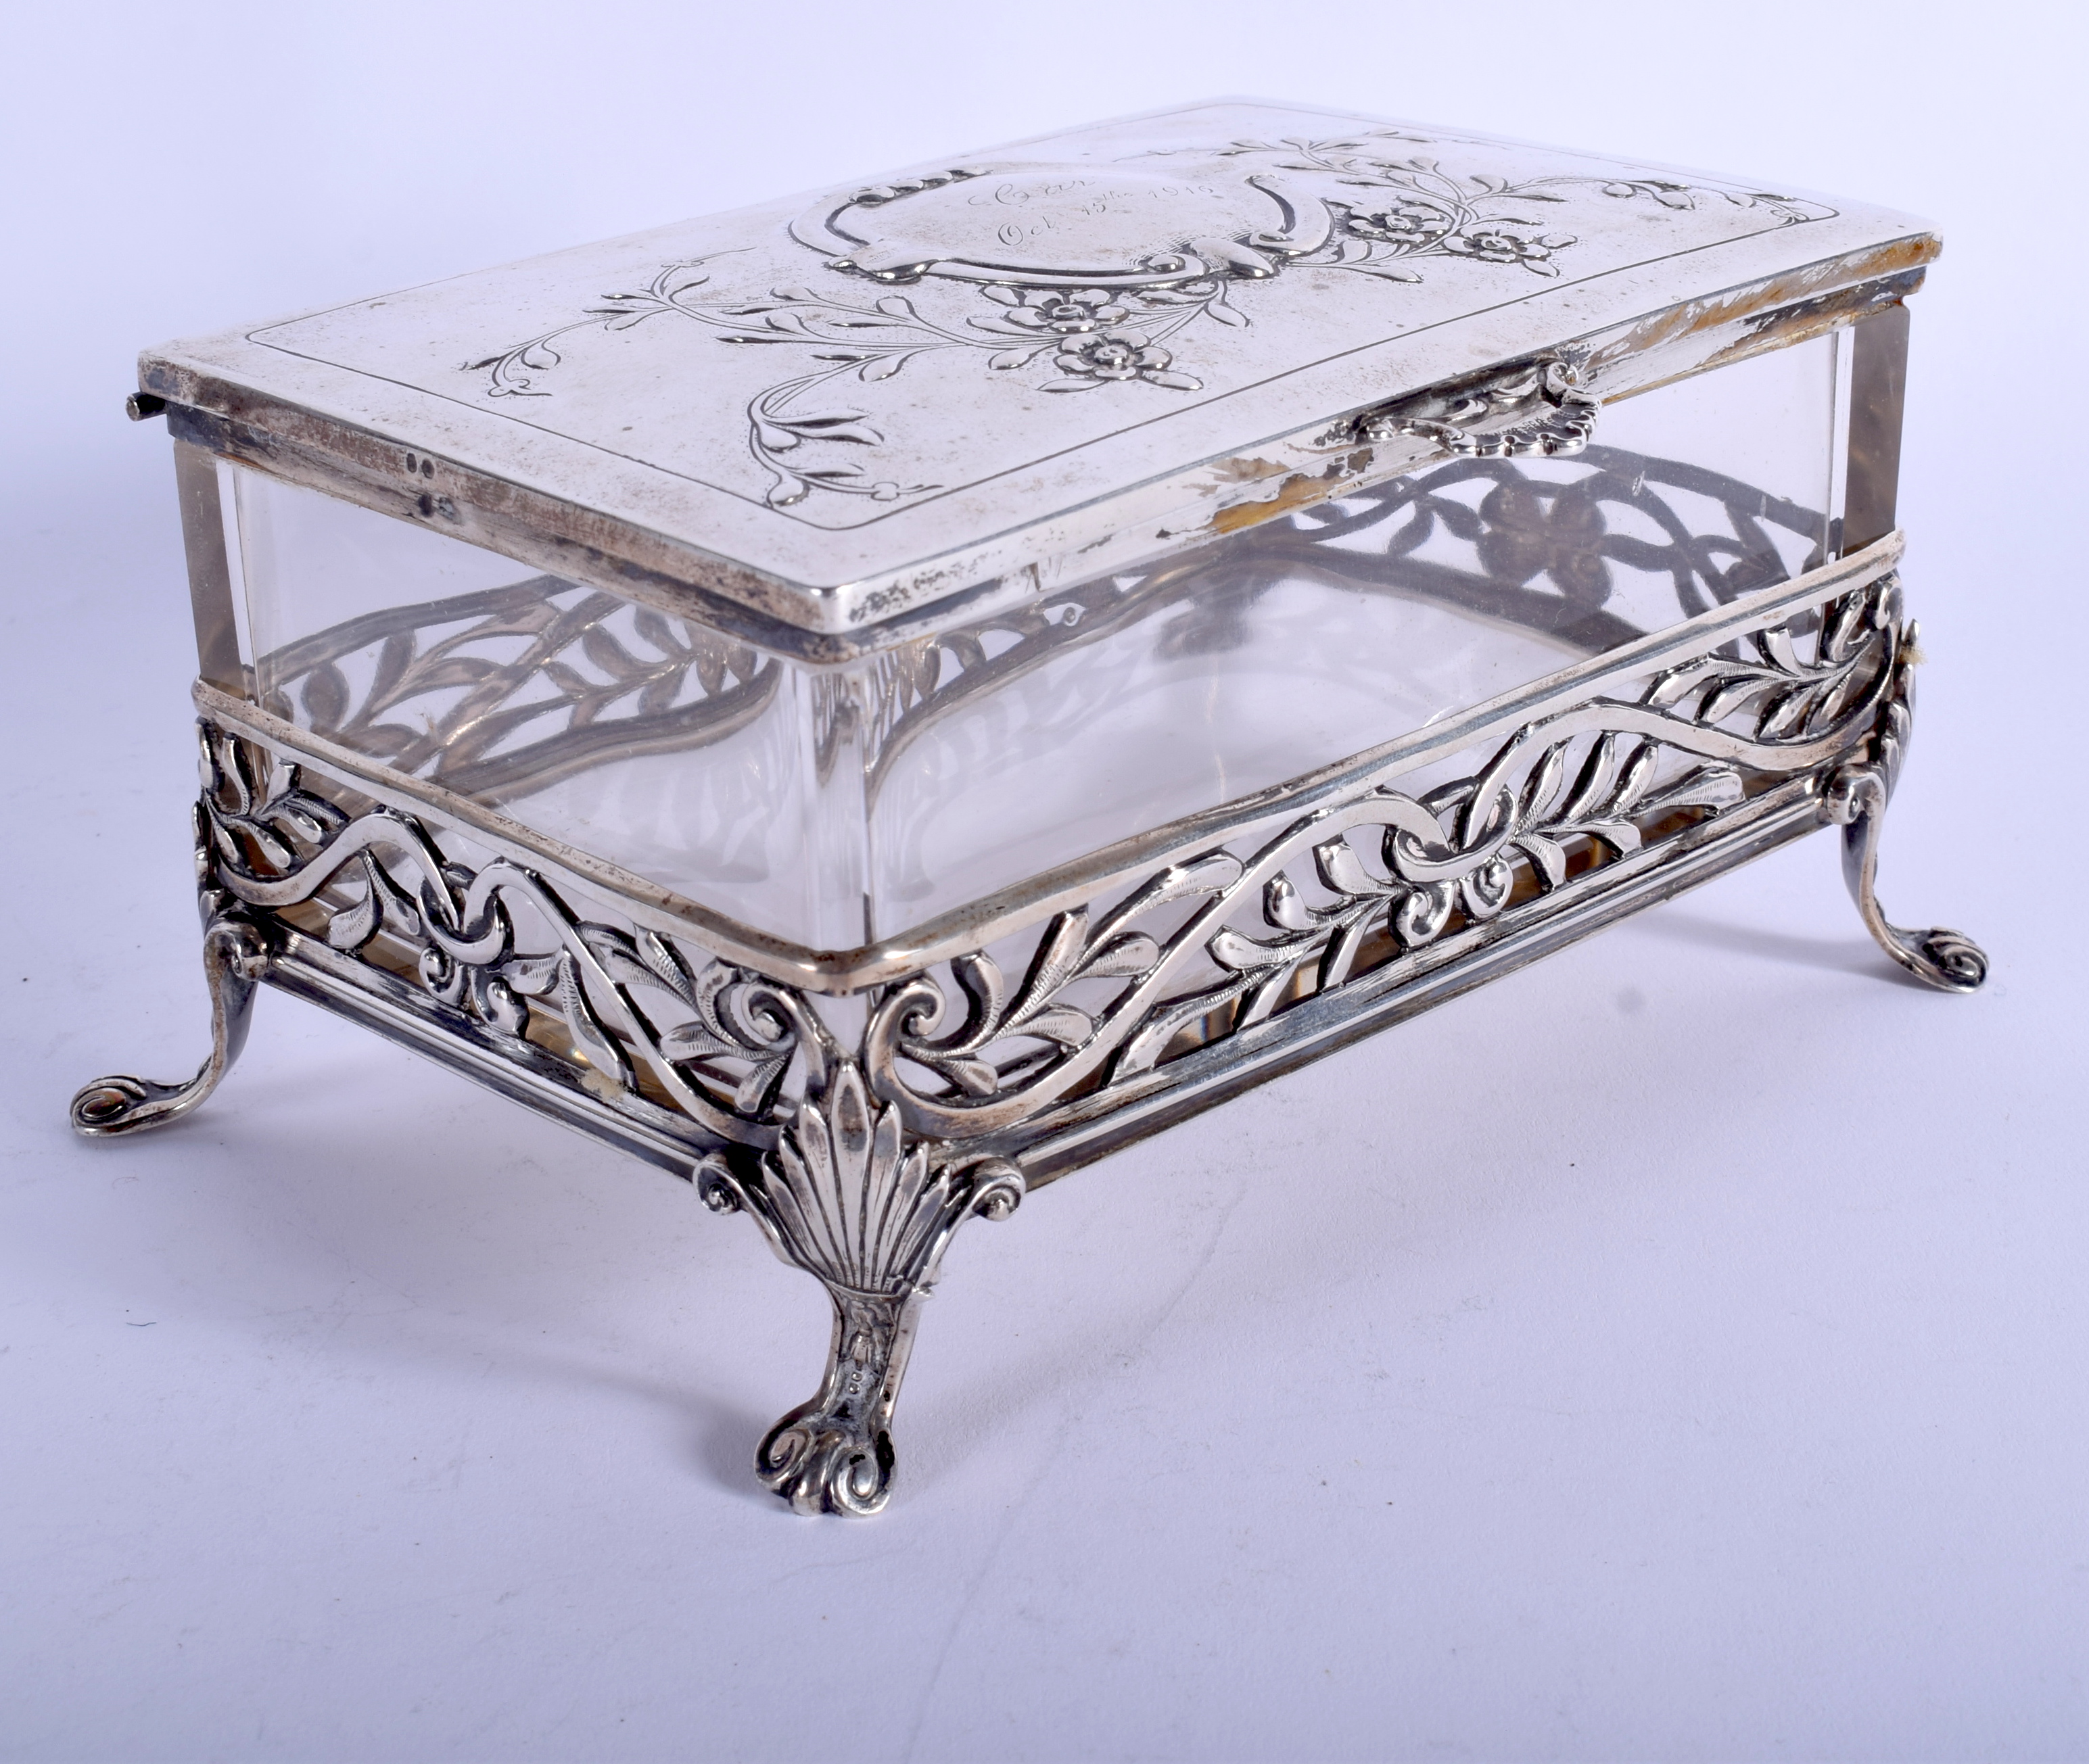 AN EARLY 20TH CENTURY CONTINENTAL SILVER AND CRYSTAL GLASS BOX. 15 cm x 9 cm.